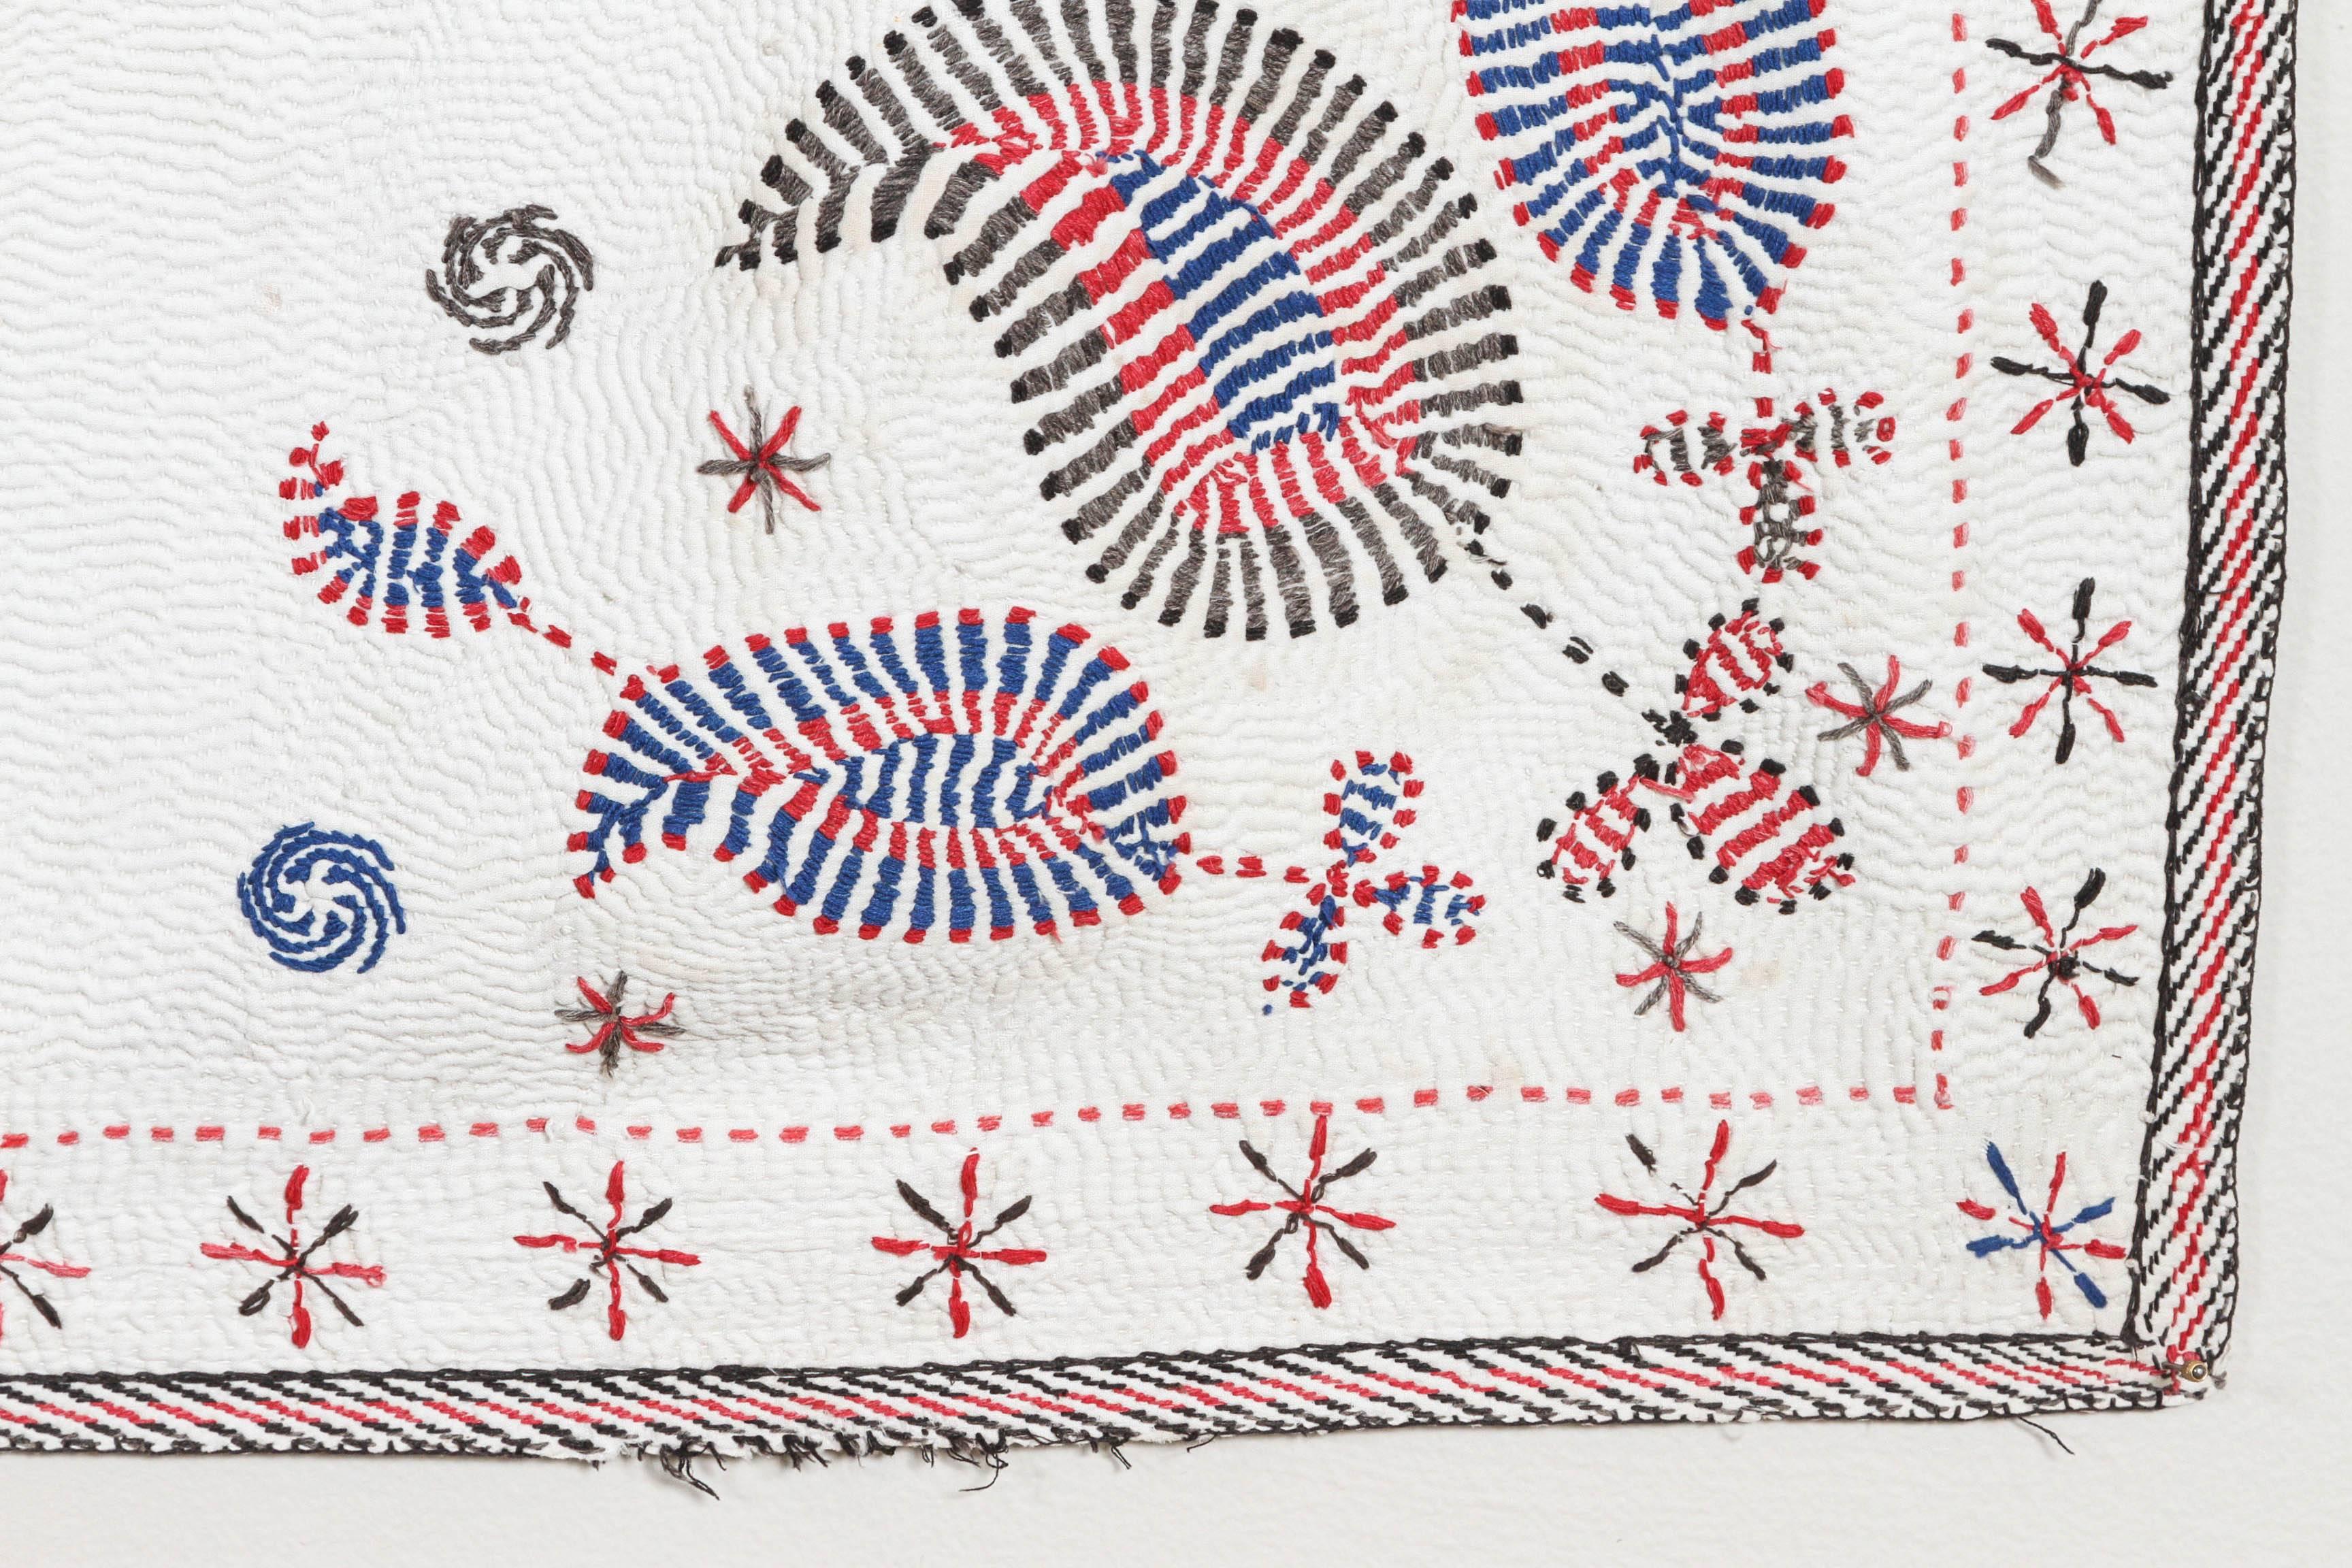 Cotton Antique Bengali Kantha Quilt in Red, Blue and White